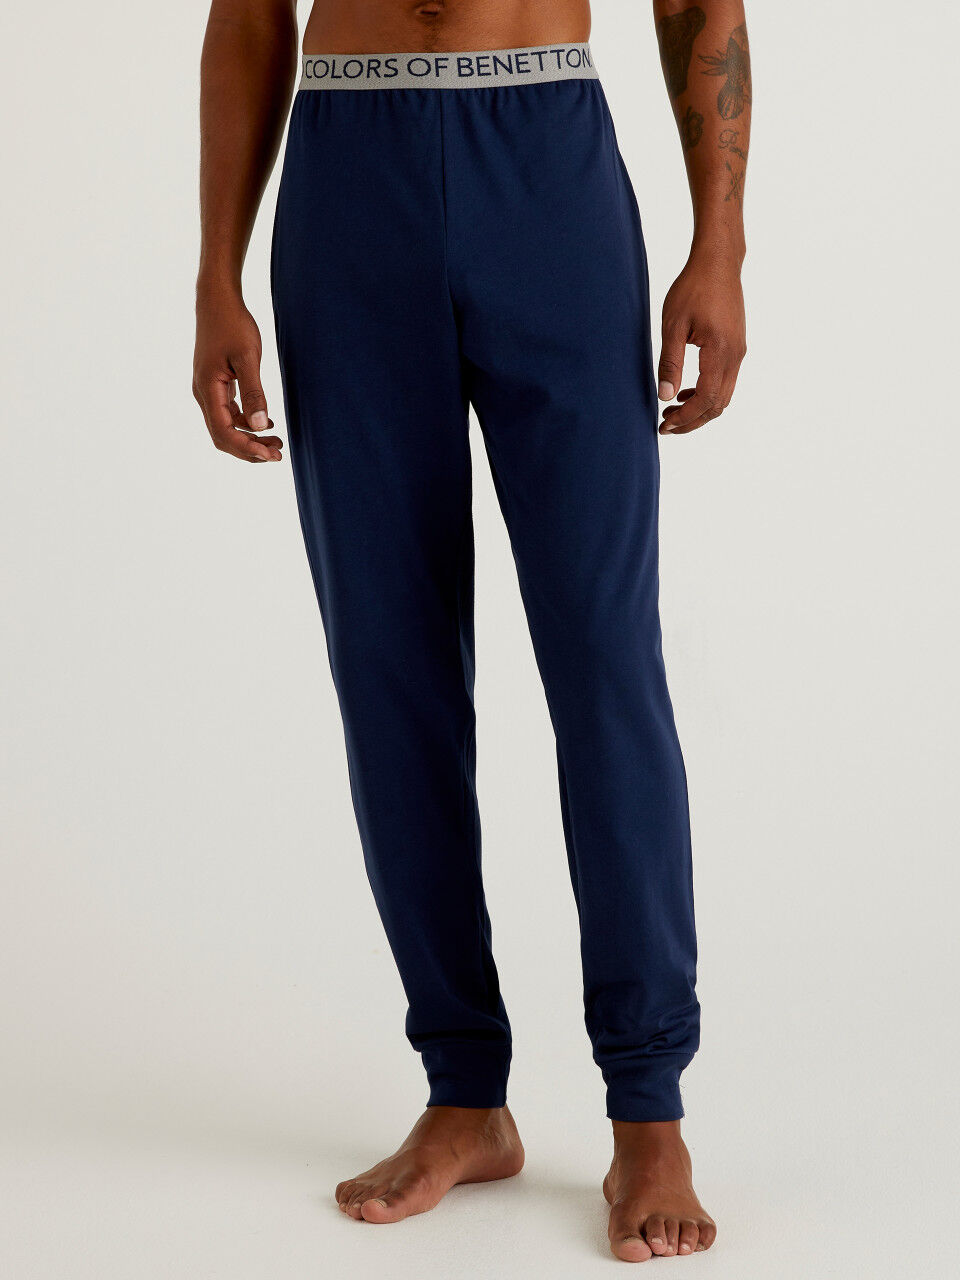 Trousers in organic cotton